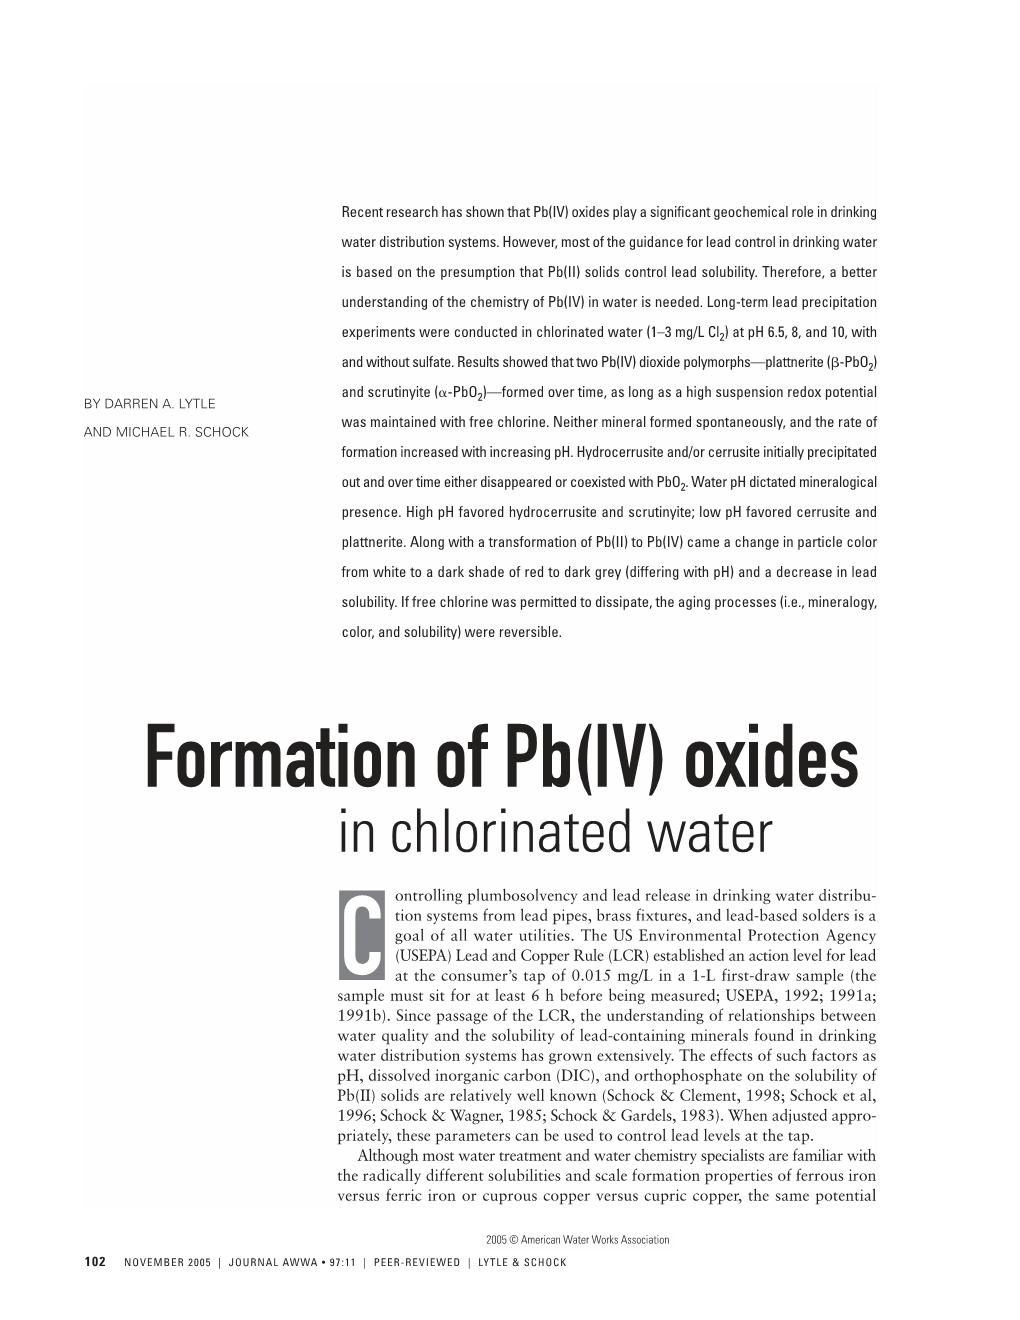 Formation of Pb(IV) Oxides in Chlorinated Water